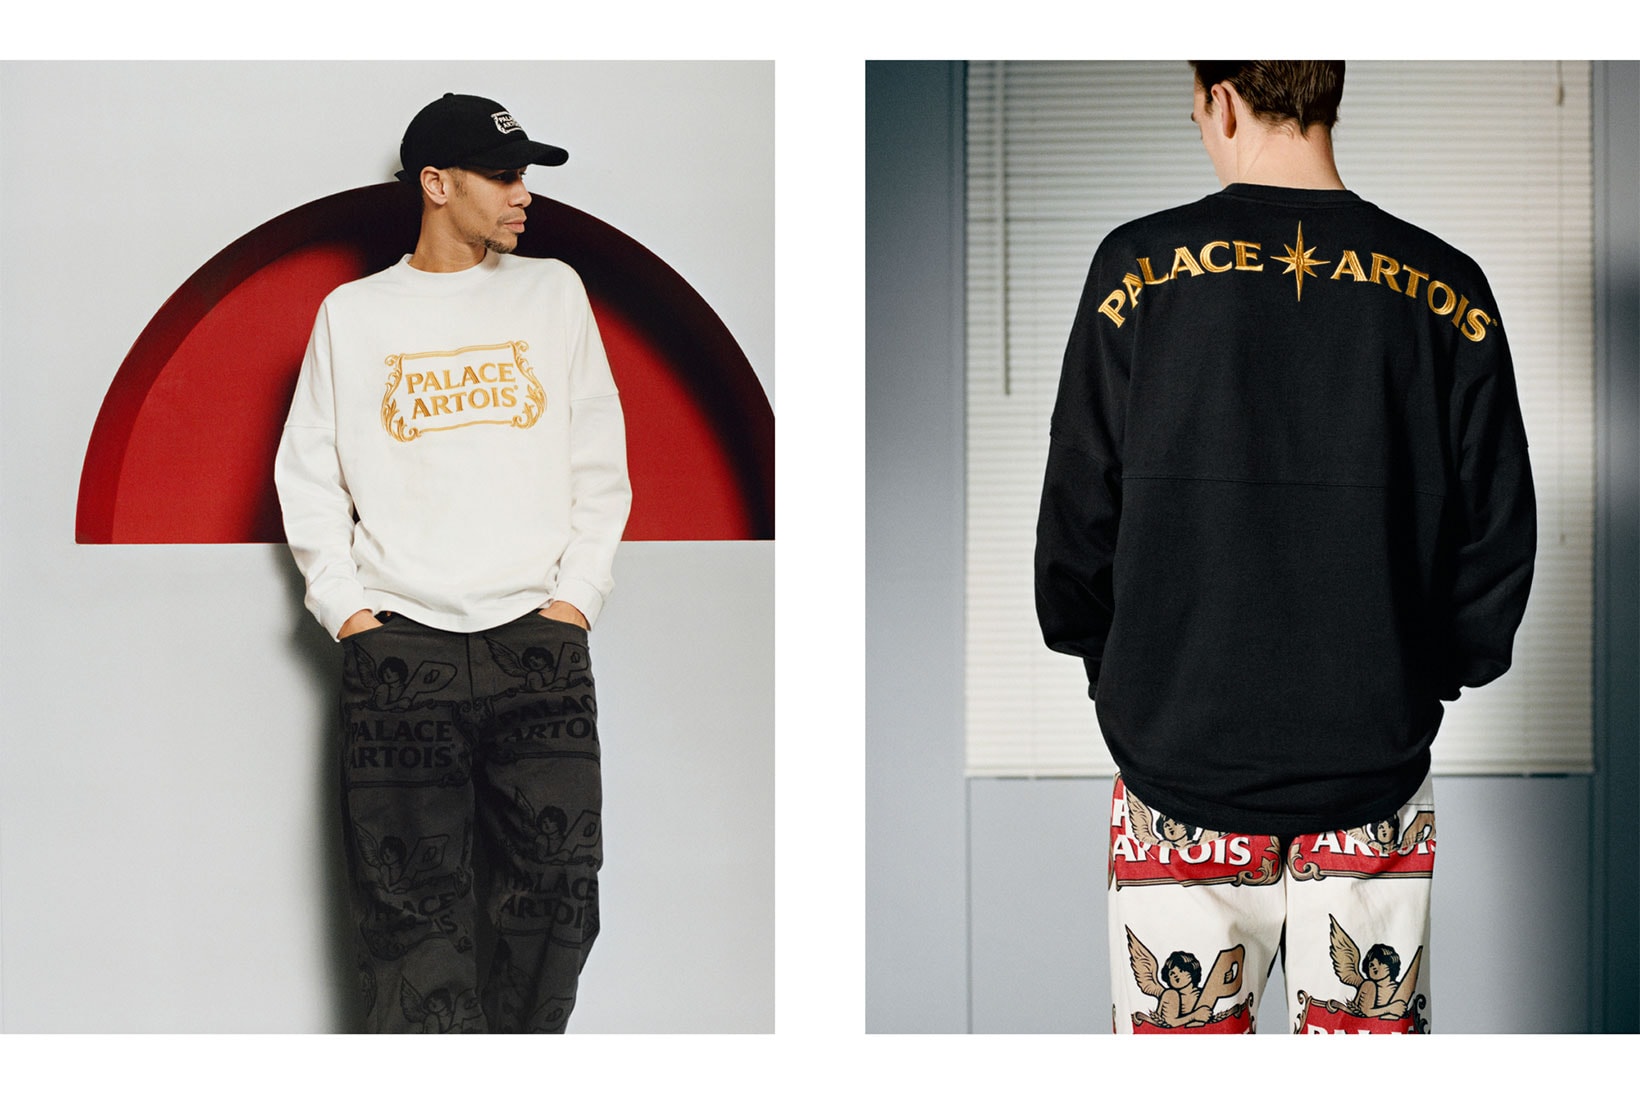 palace skateboards stella artois beer collaboration collection long sleeved tee